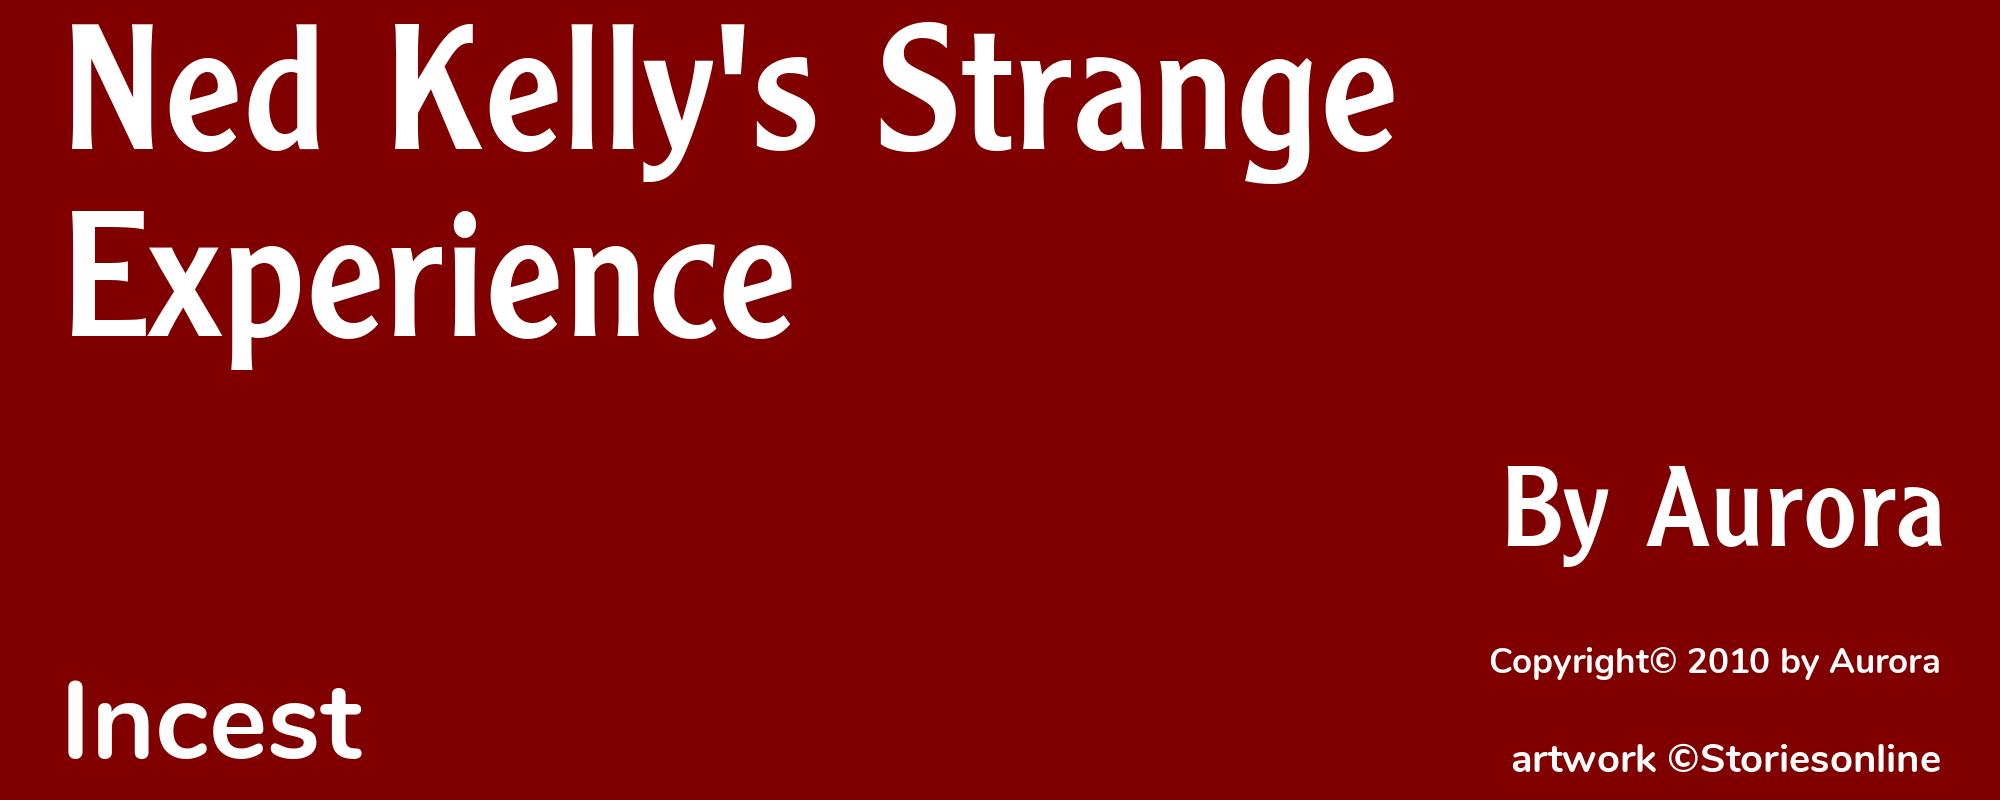 Ned Kelly's Strange Experience - Cover